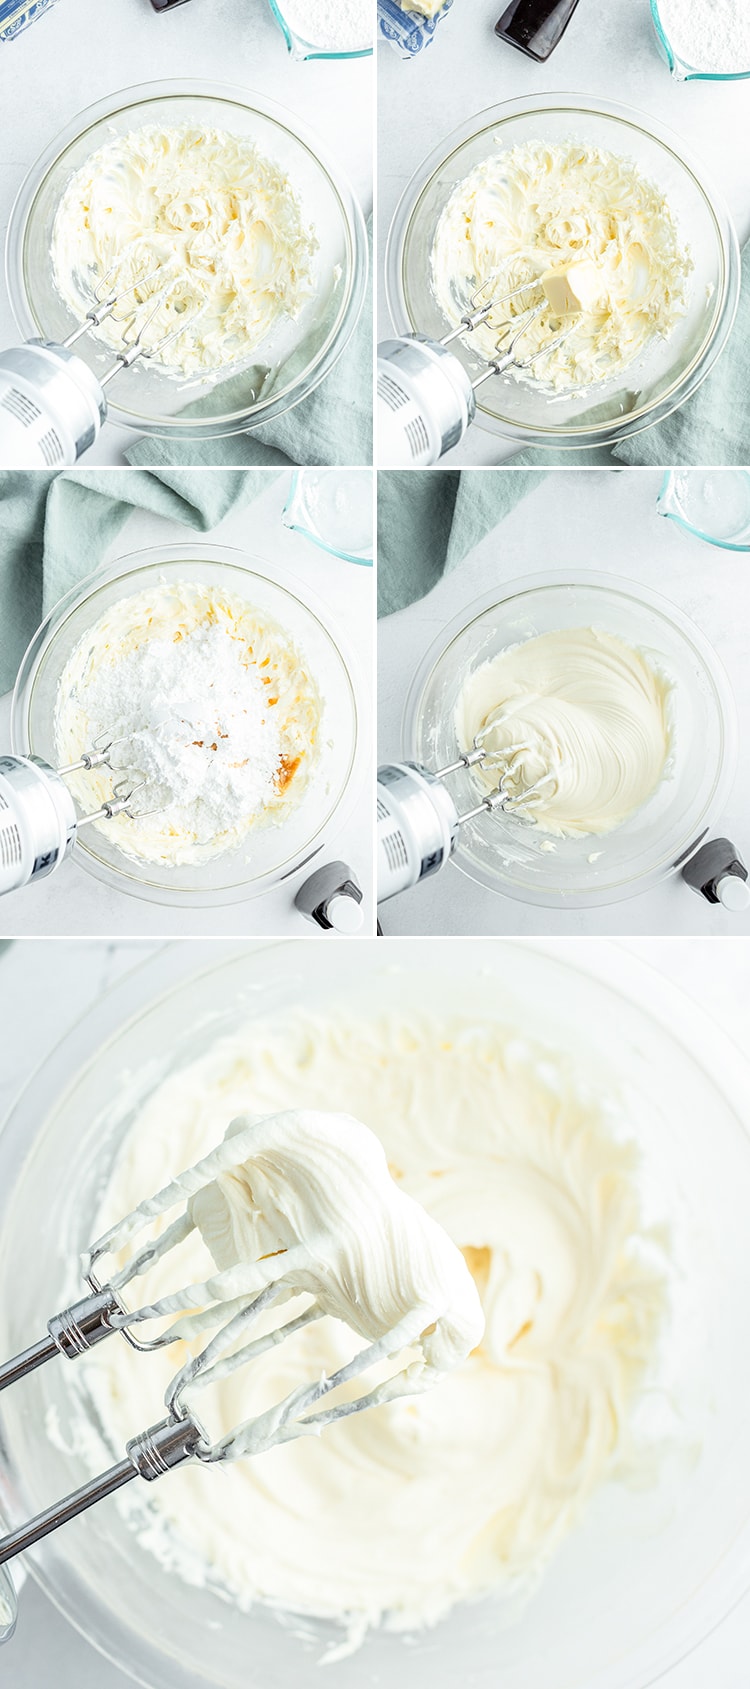 Step by step photos how to make cream cheese frosting.